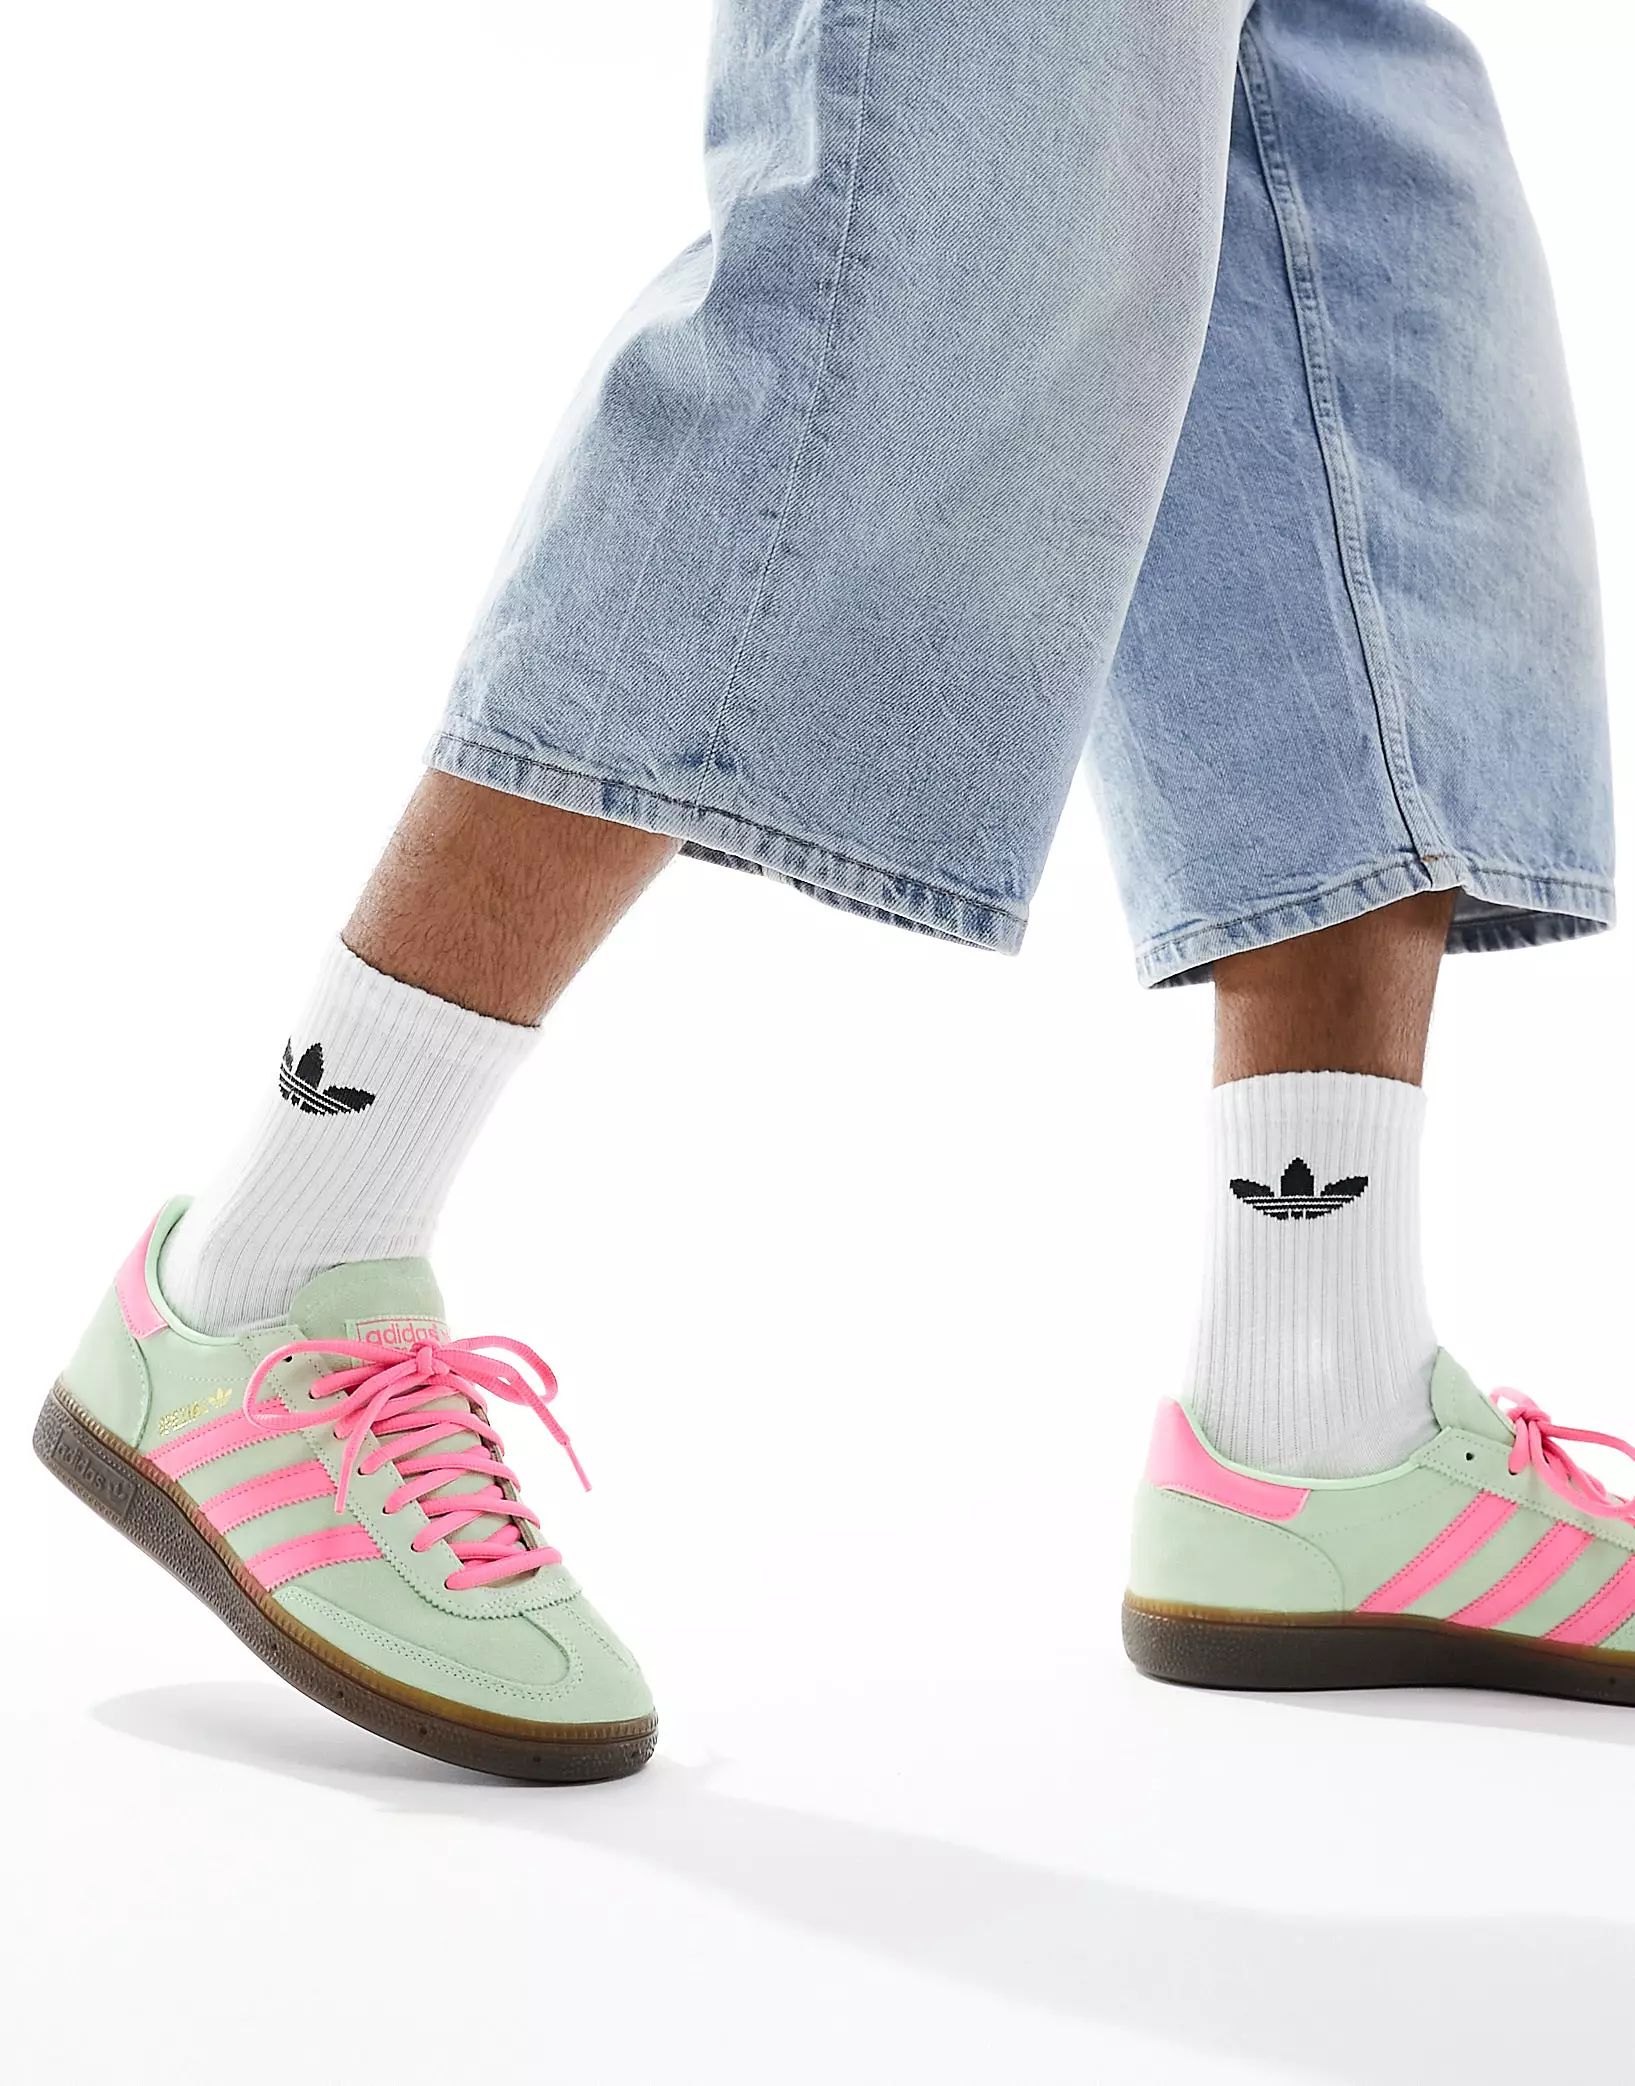 adidas Originals Handball Spezial trainers in green and pink | ASOS (Global)